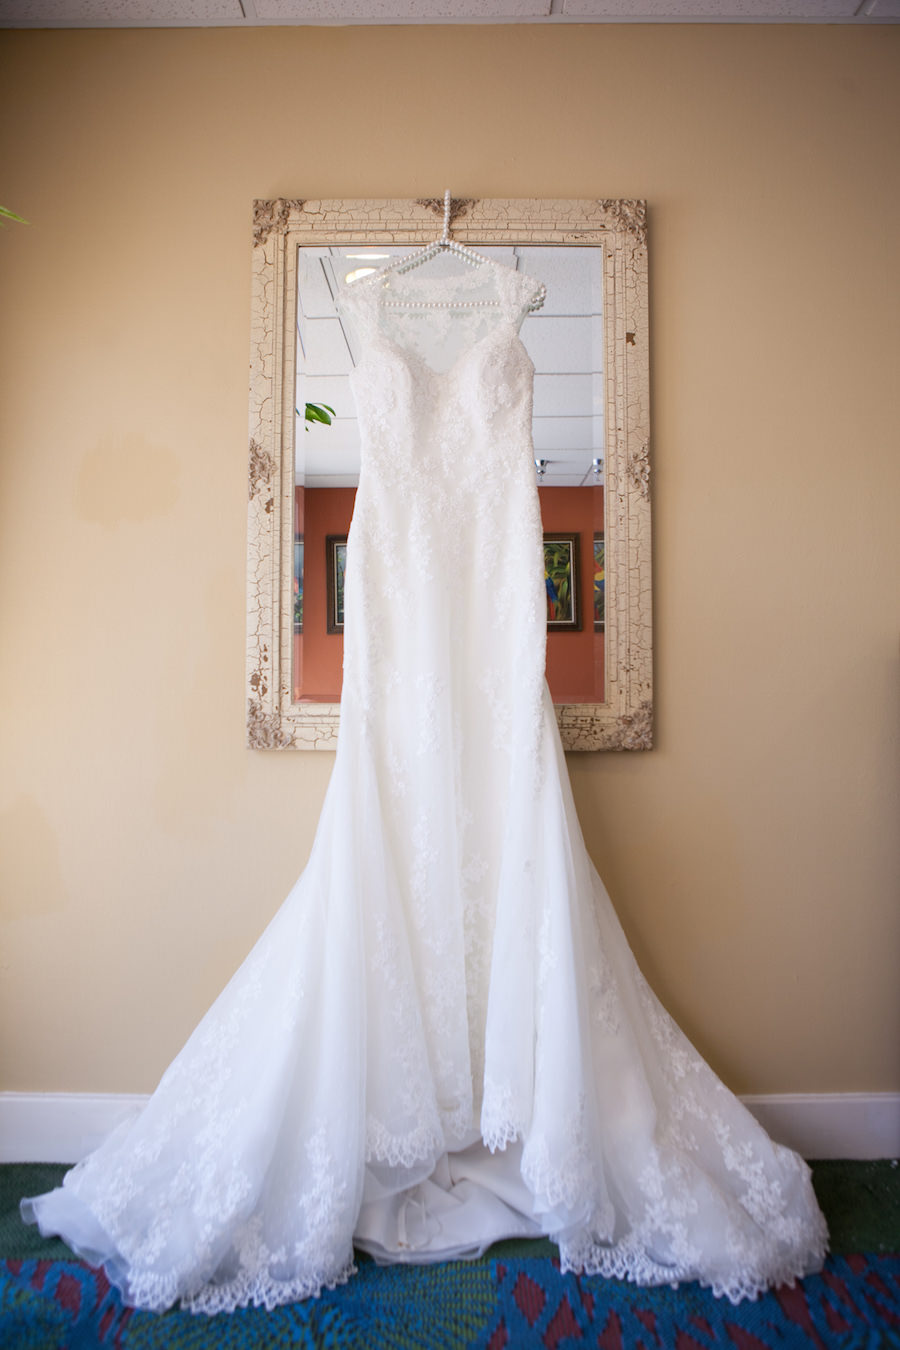 Ivory, Lace Pronovias Wedding Dress with See Through Back on Pearl Hanger | Safety Harbor Wedding Photographer Carrie Wildes Photography